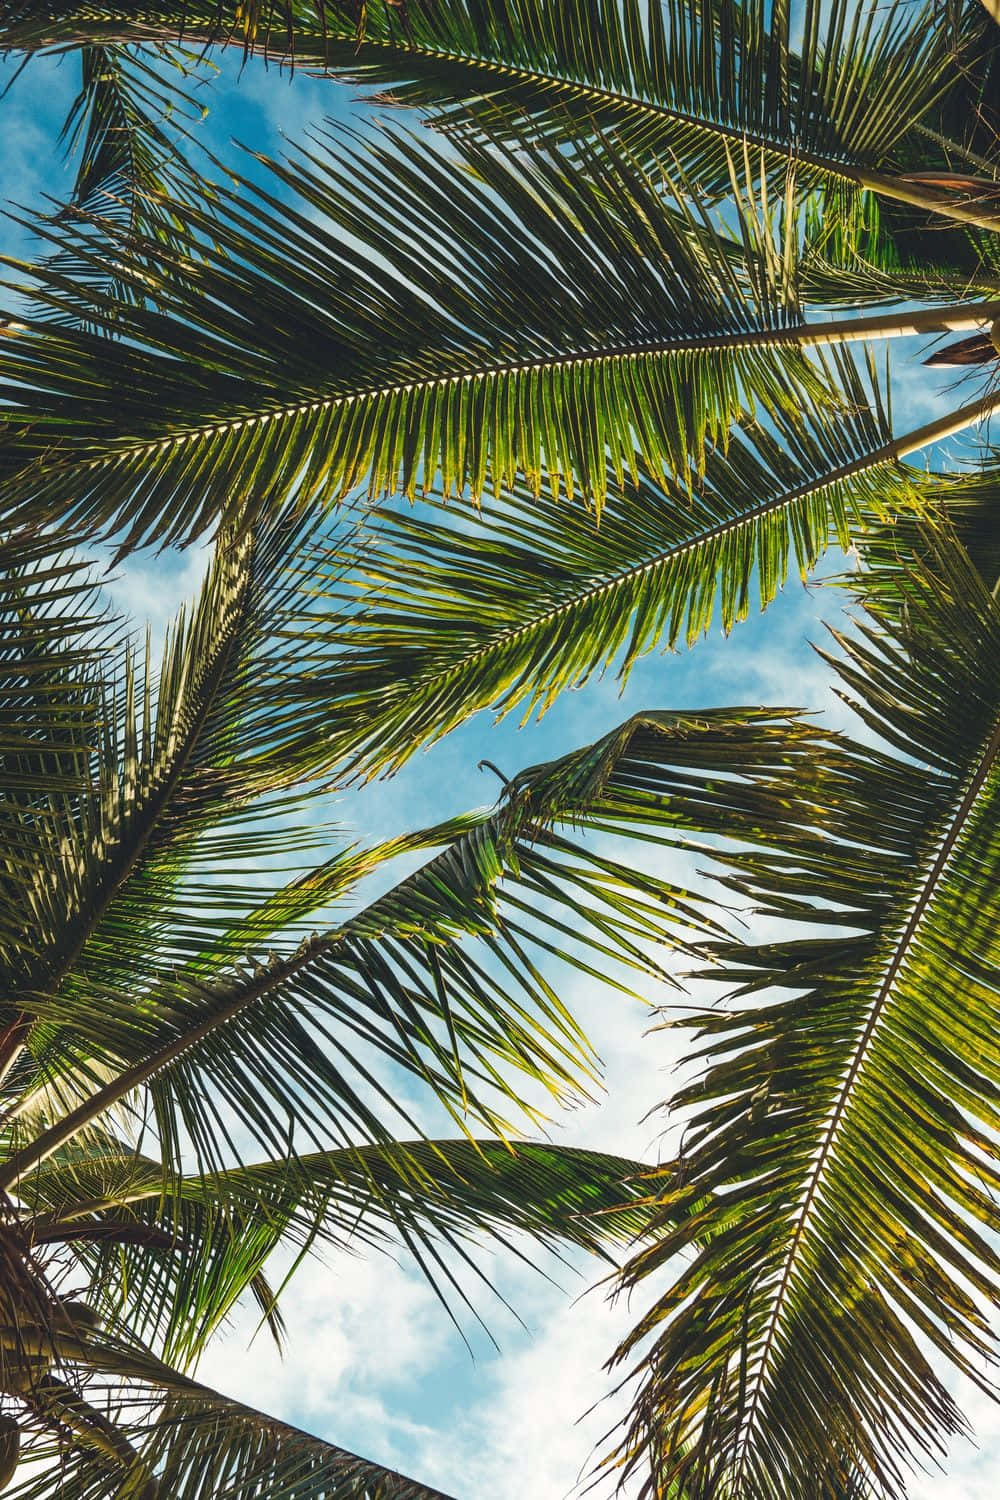 "Feel the Relaxing Summer Vibes with a Palm Tree iPhone Wallpaper" Wallpaper